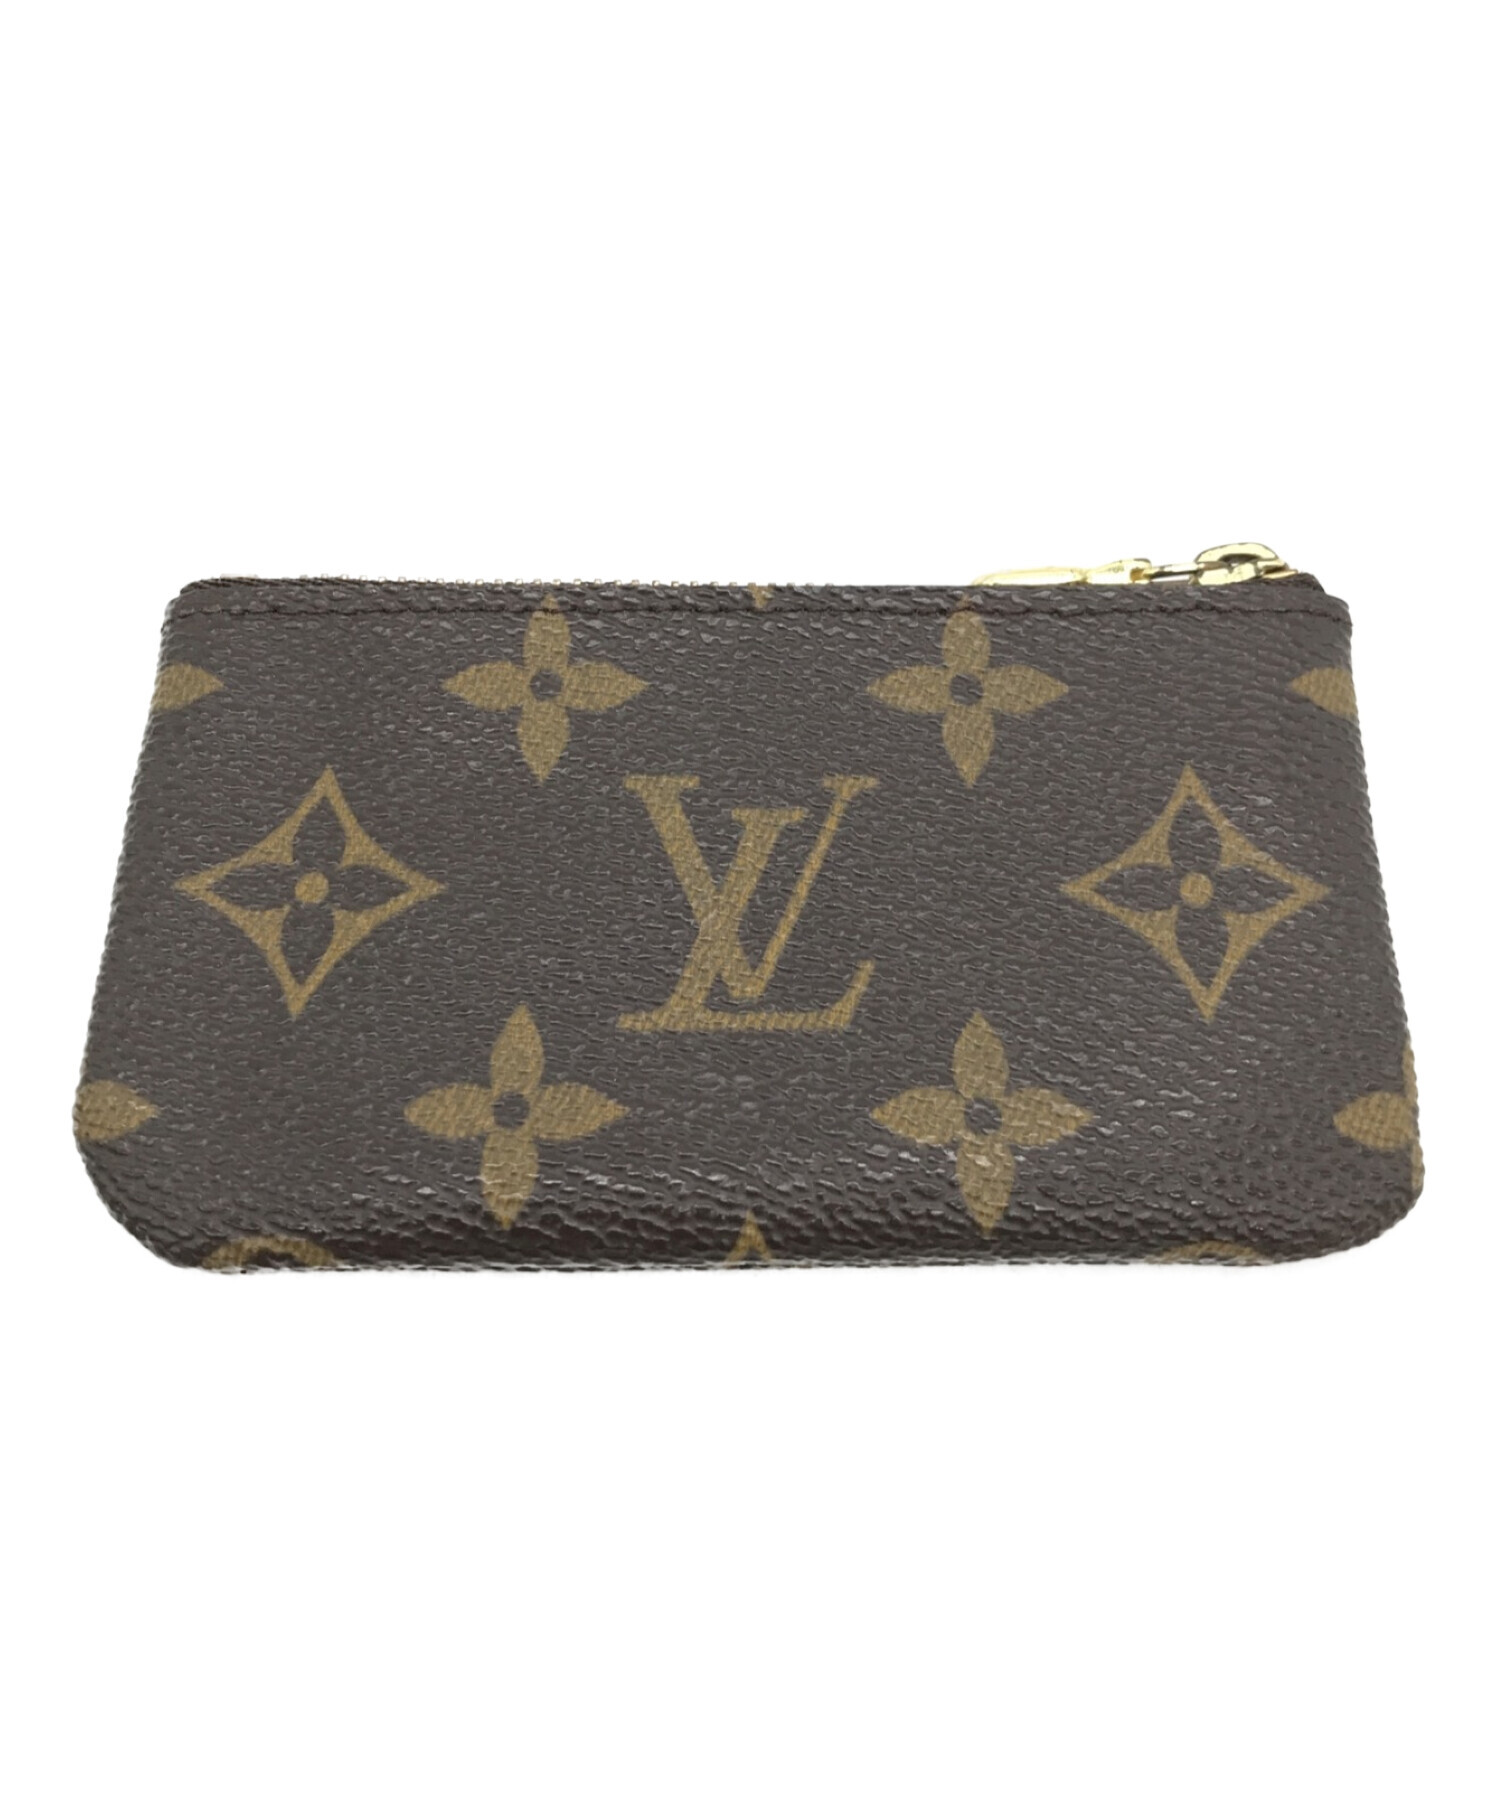 LOUIS VUITTON (ルイ ヴィトン) カードキーケース ポシェット・クレ